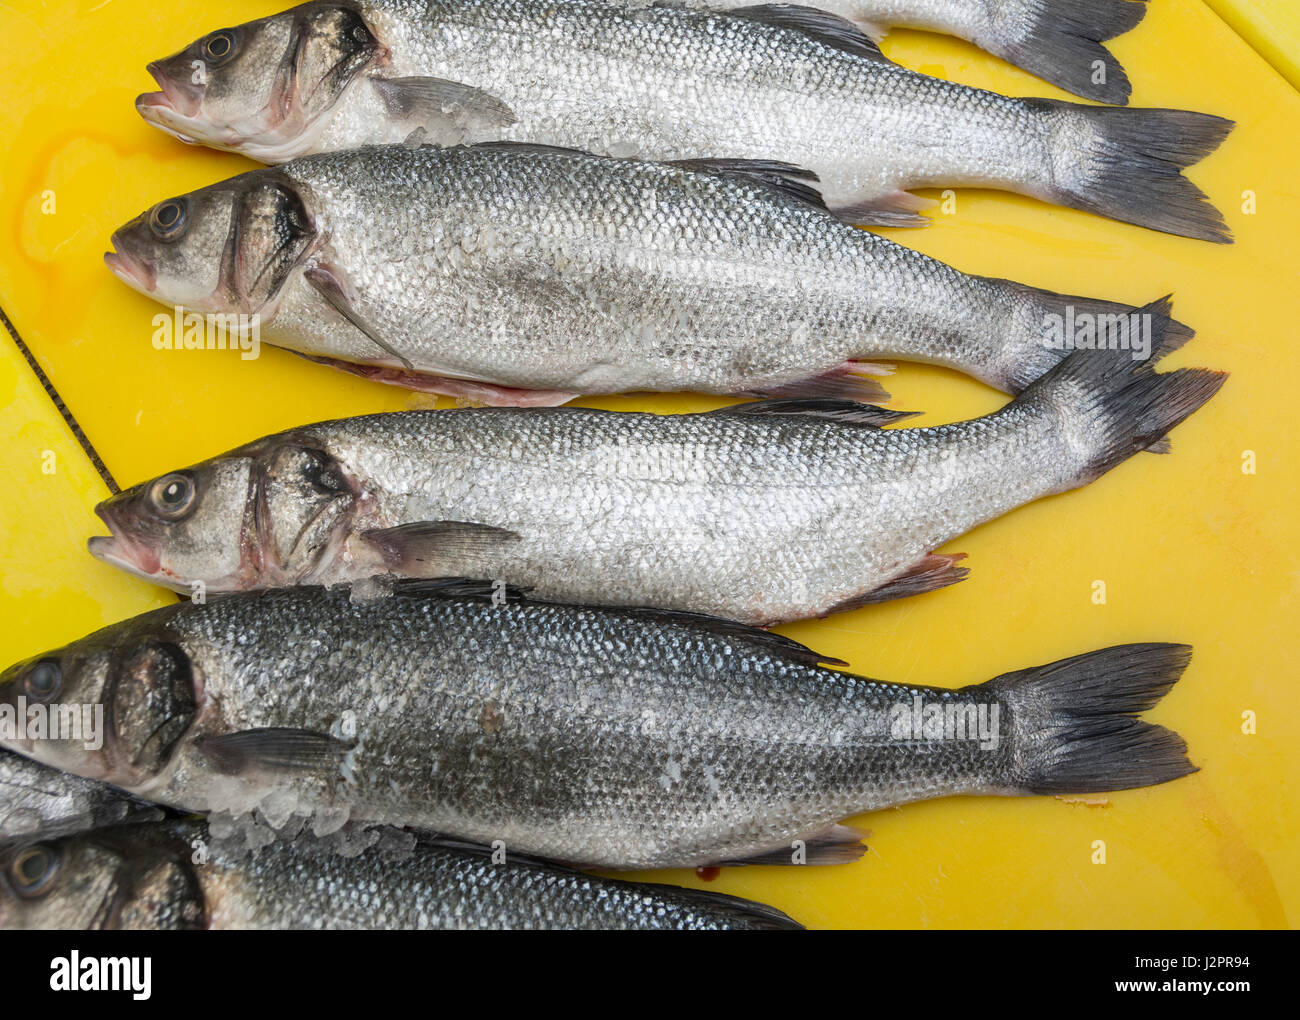 Grey mullet on a yellow chopping board Stock Photo